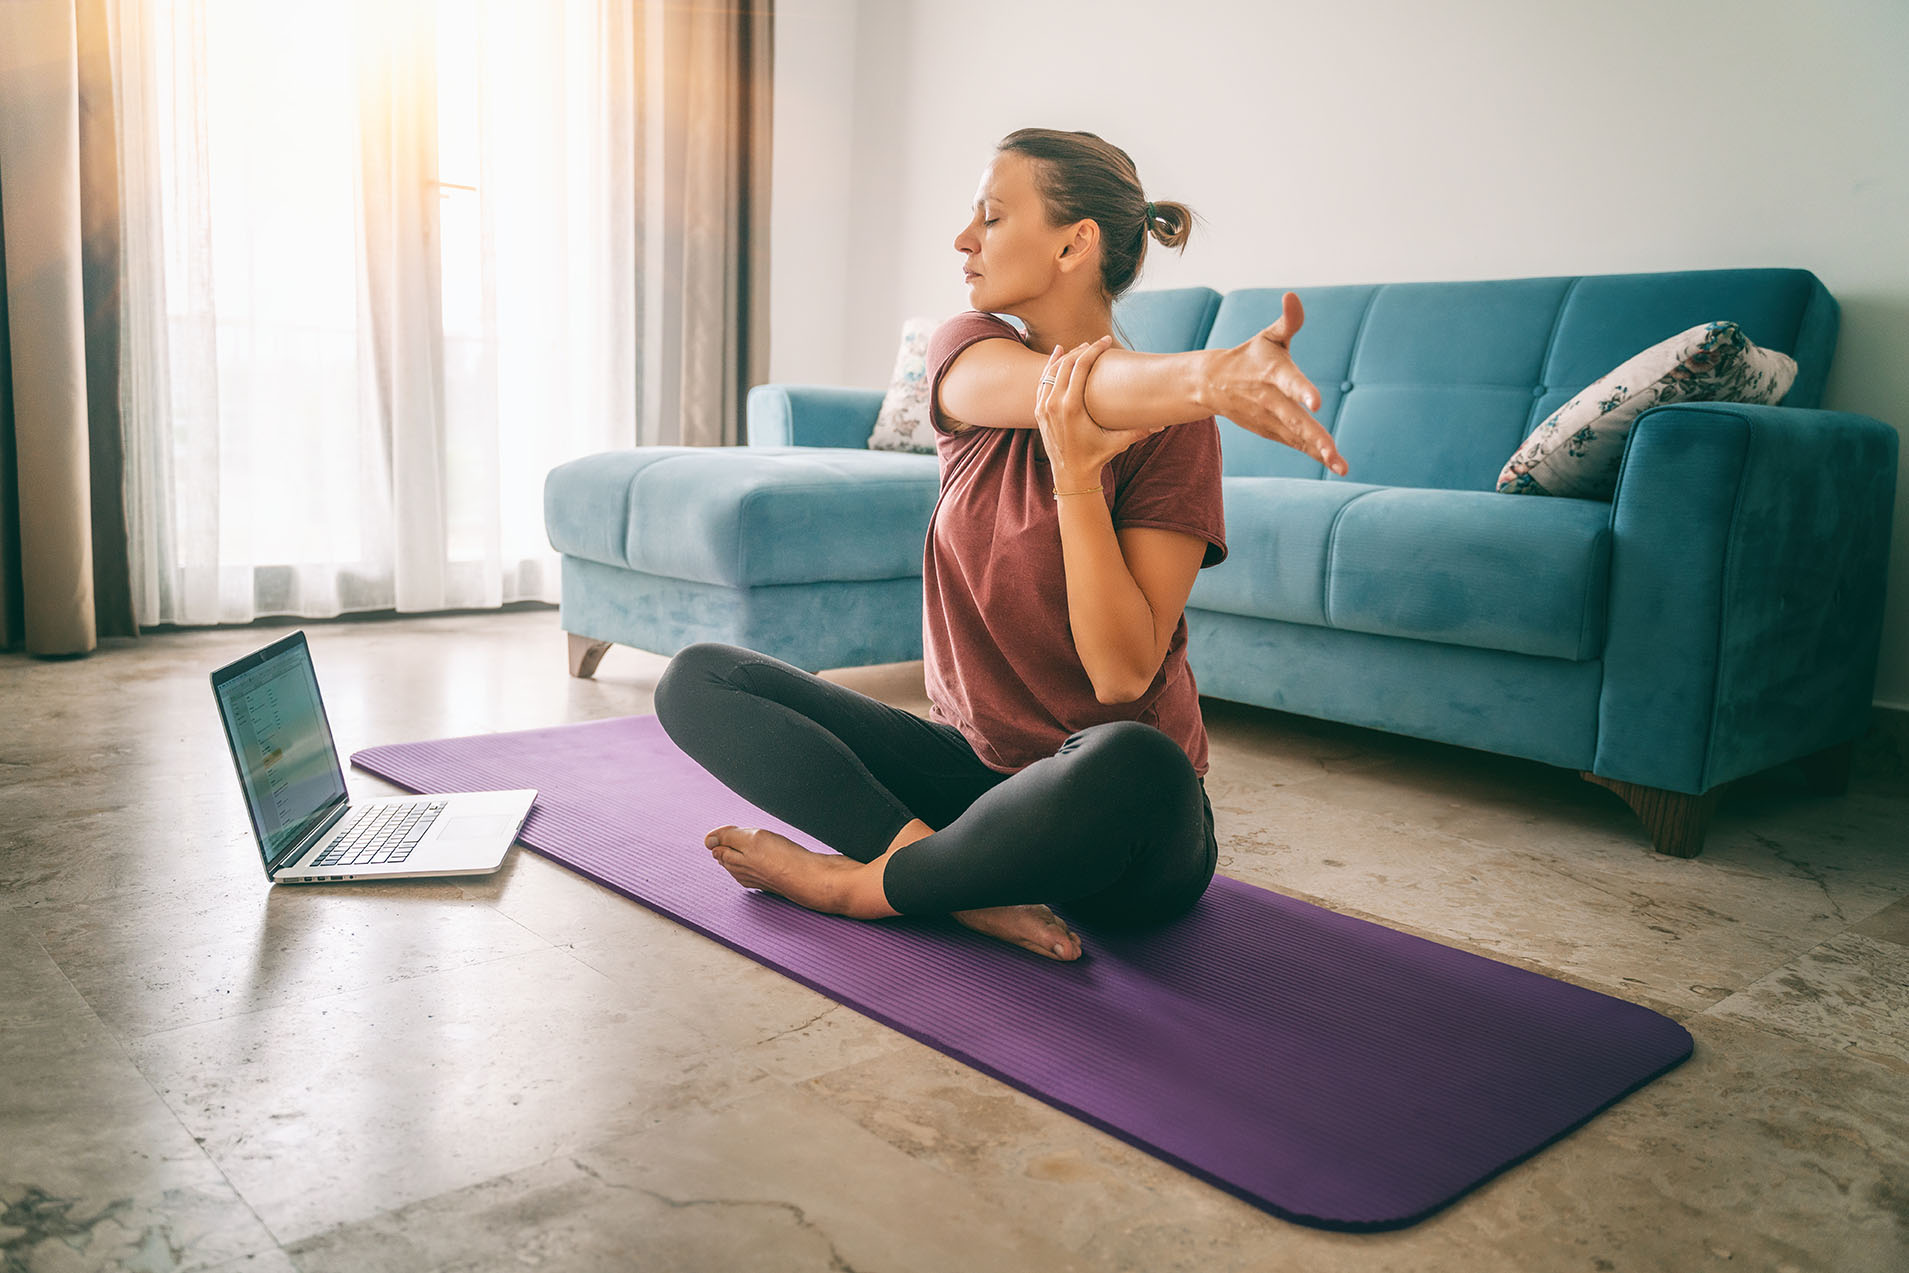 How Yoga Can Help Recover From Drug Addiction